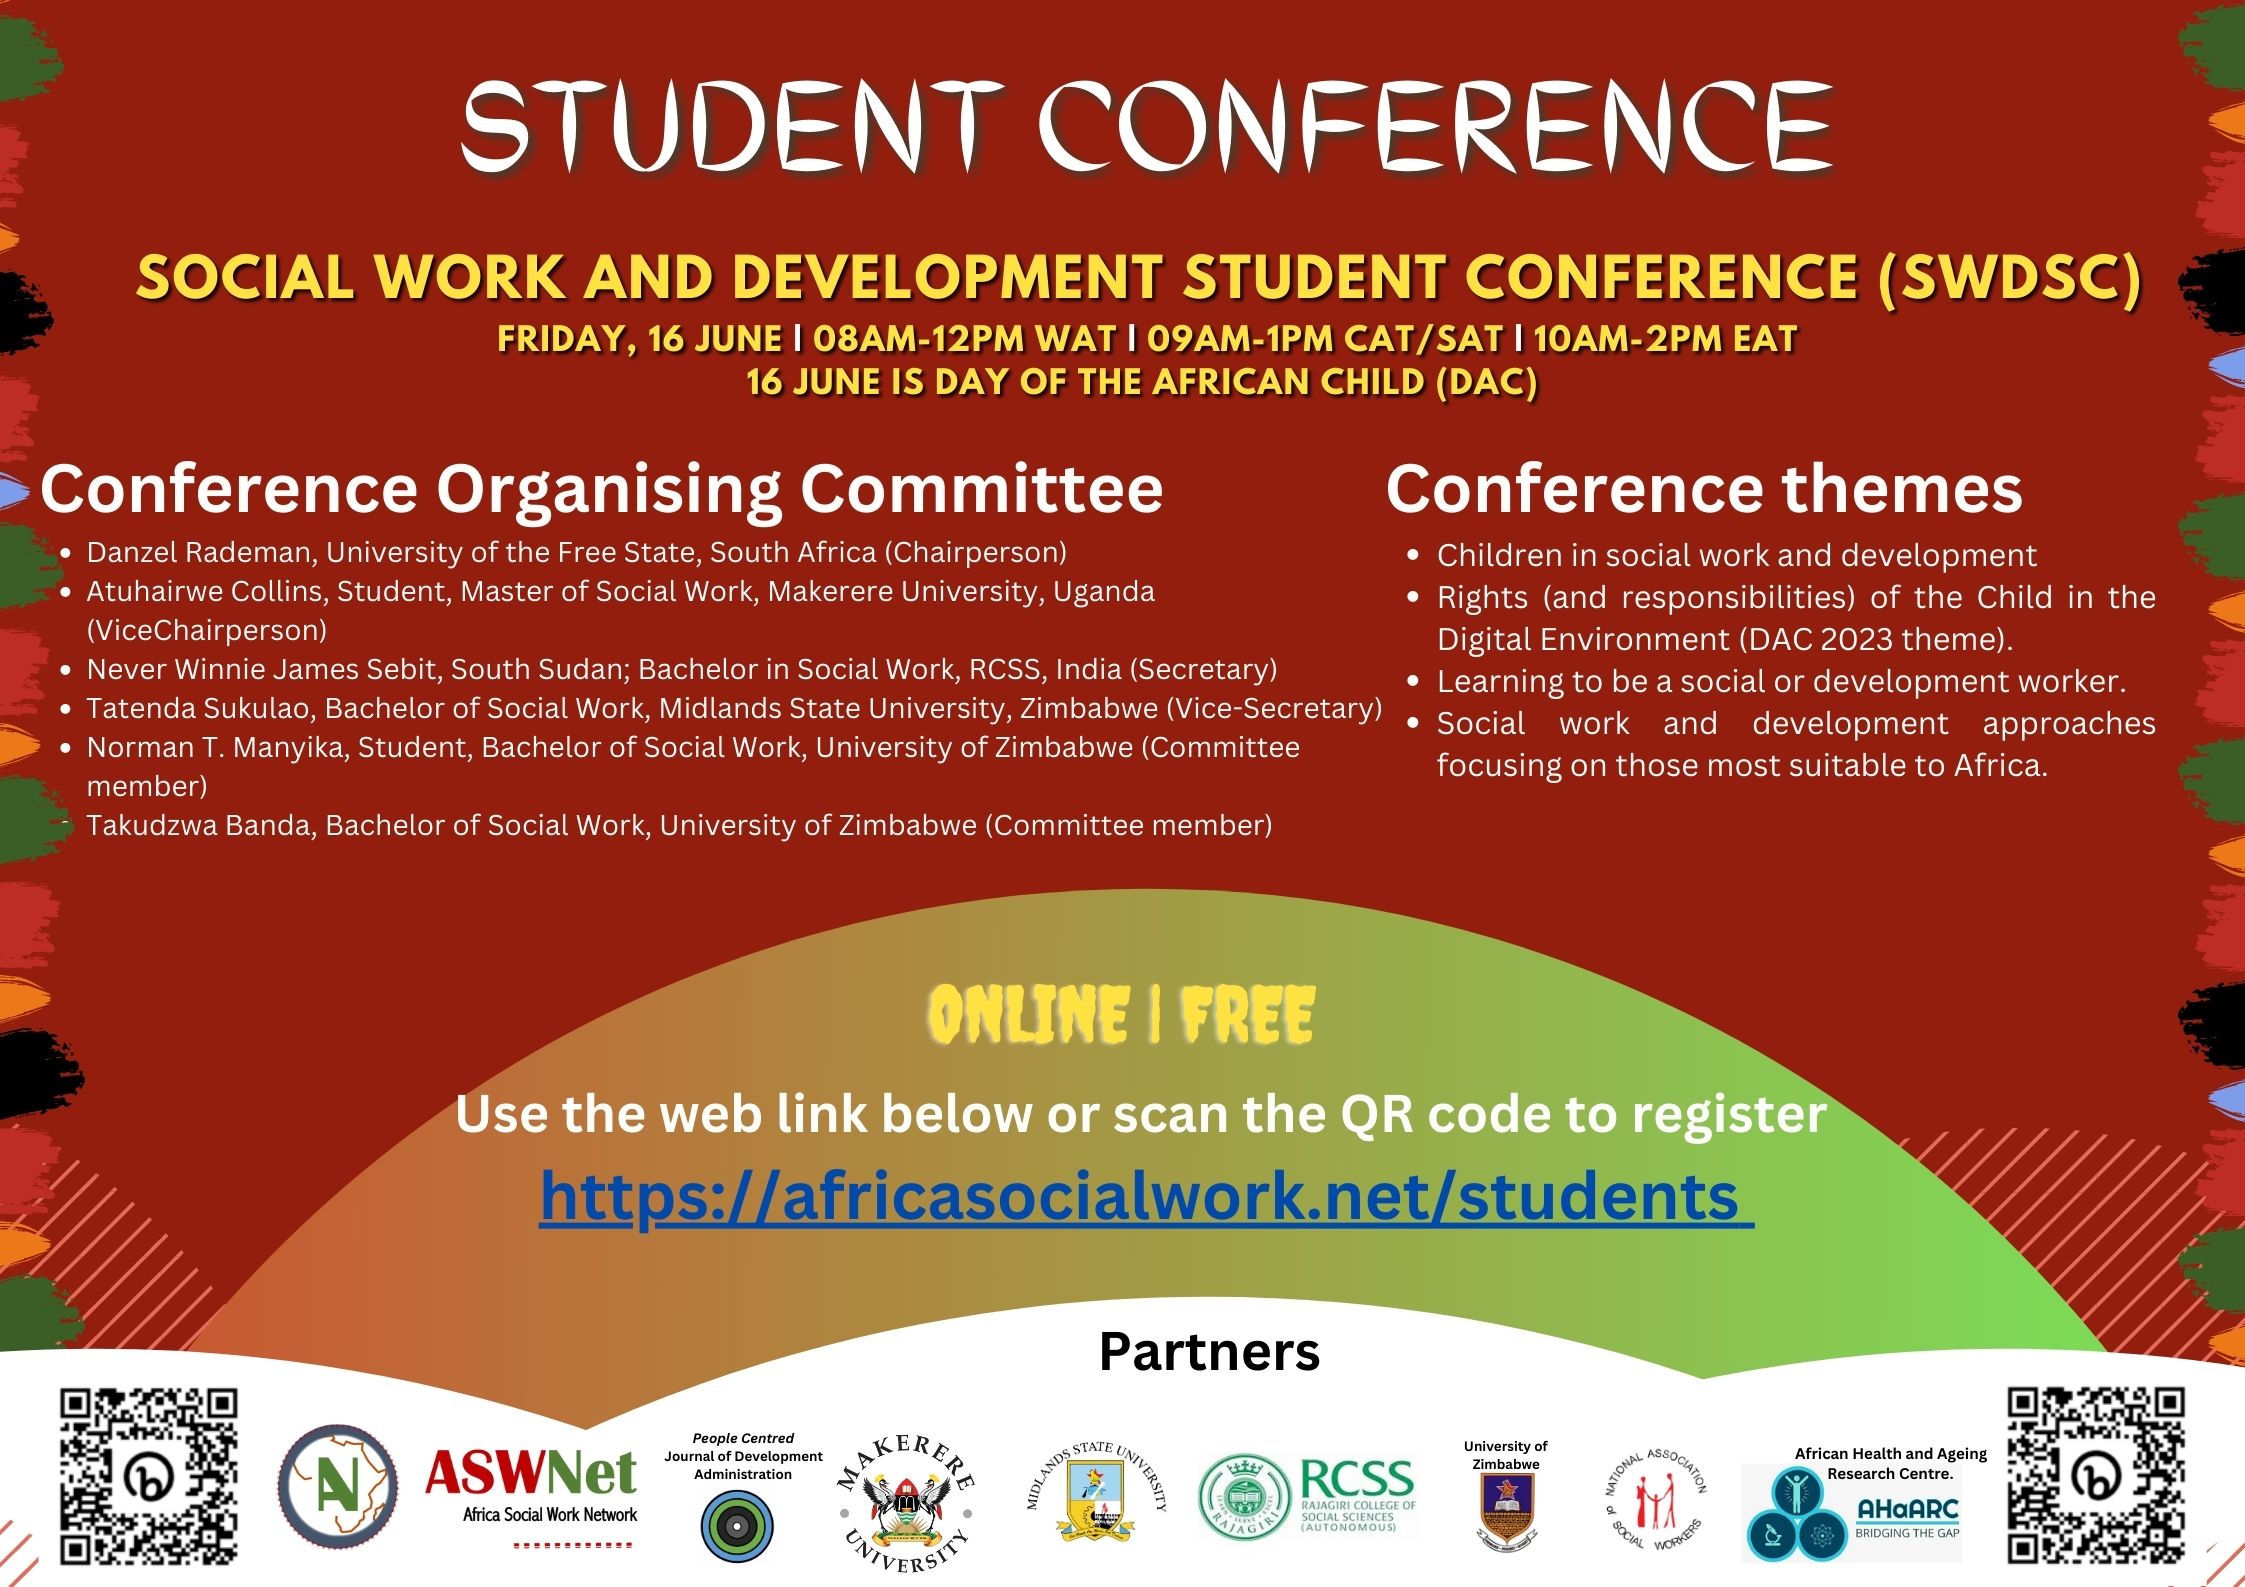 Students Conference on DAY OF THE AFRICAN CHILD (DAC): 16 JUNE 2023